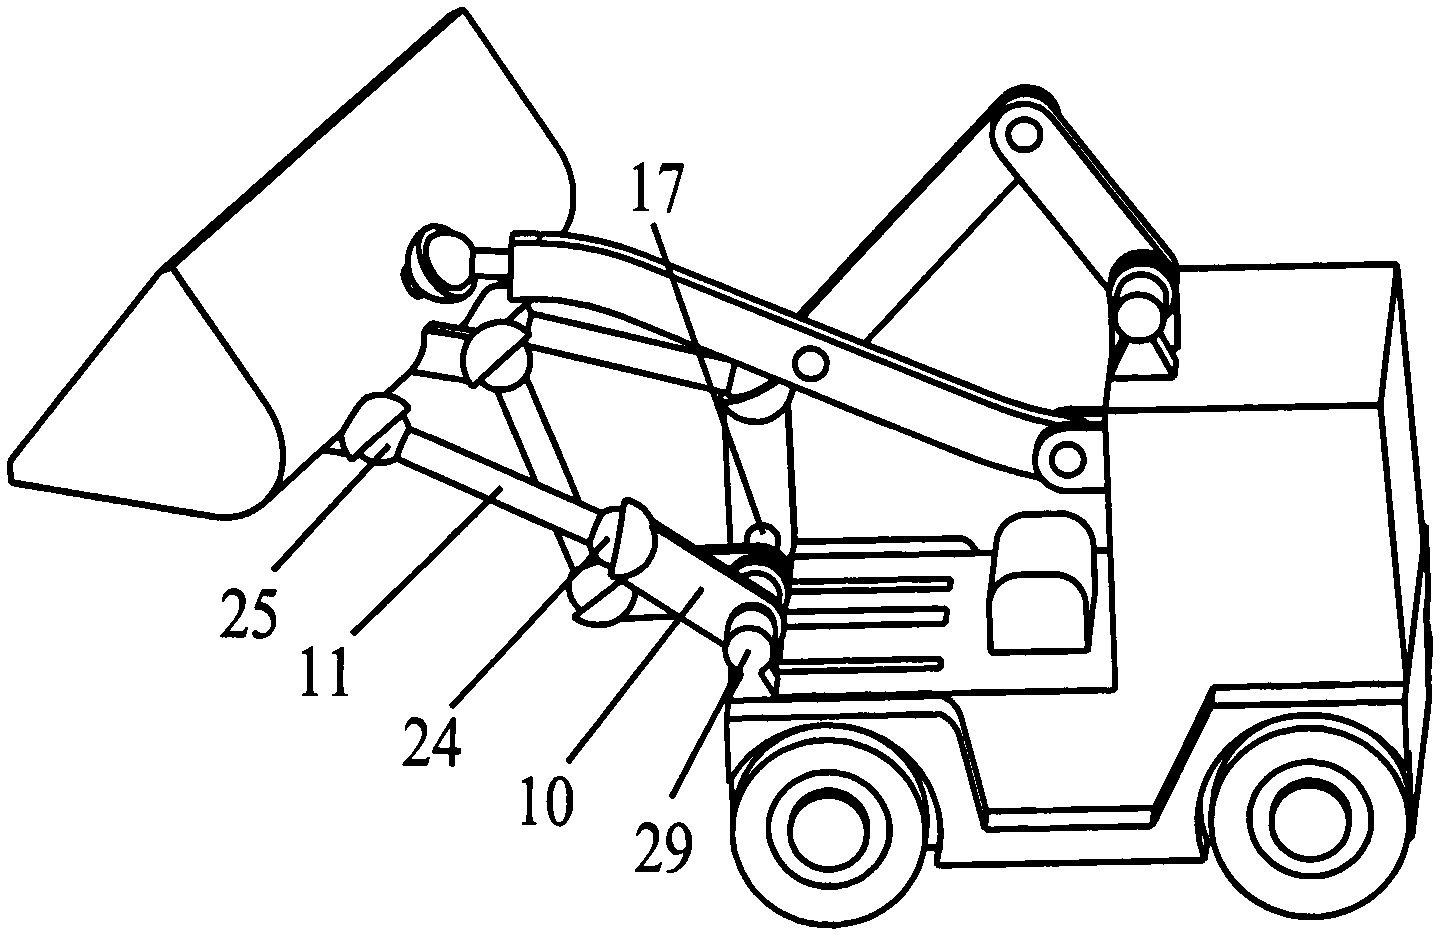 Space controllable mechanism-type loader with one-dimensional rotational moving arm and three-dimensional rotational bucket